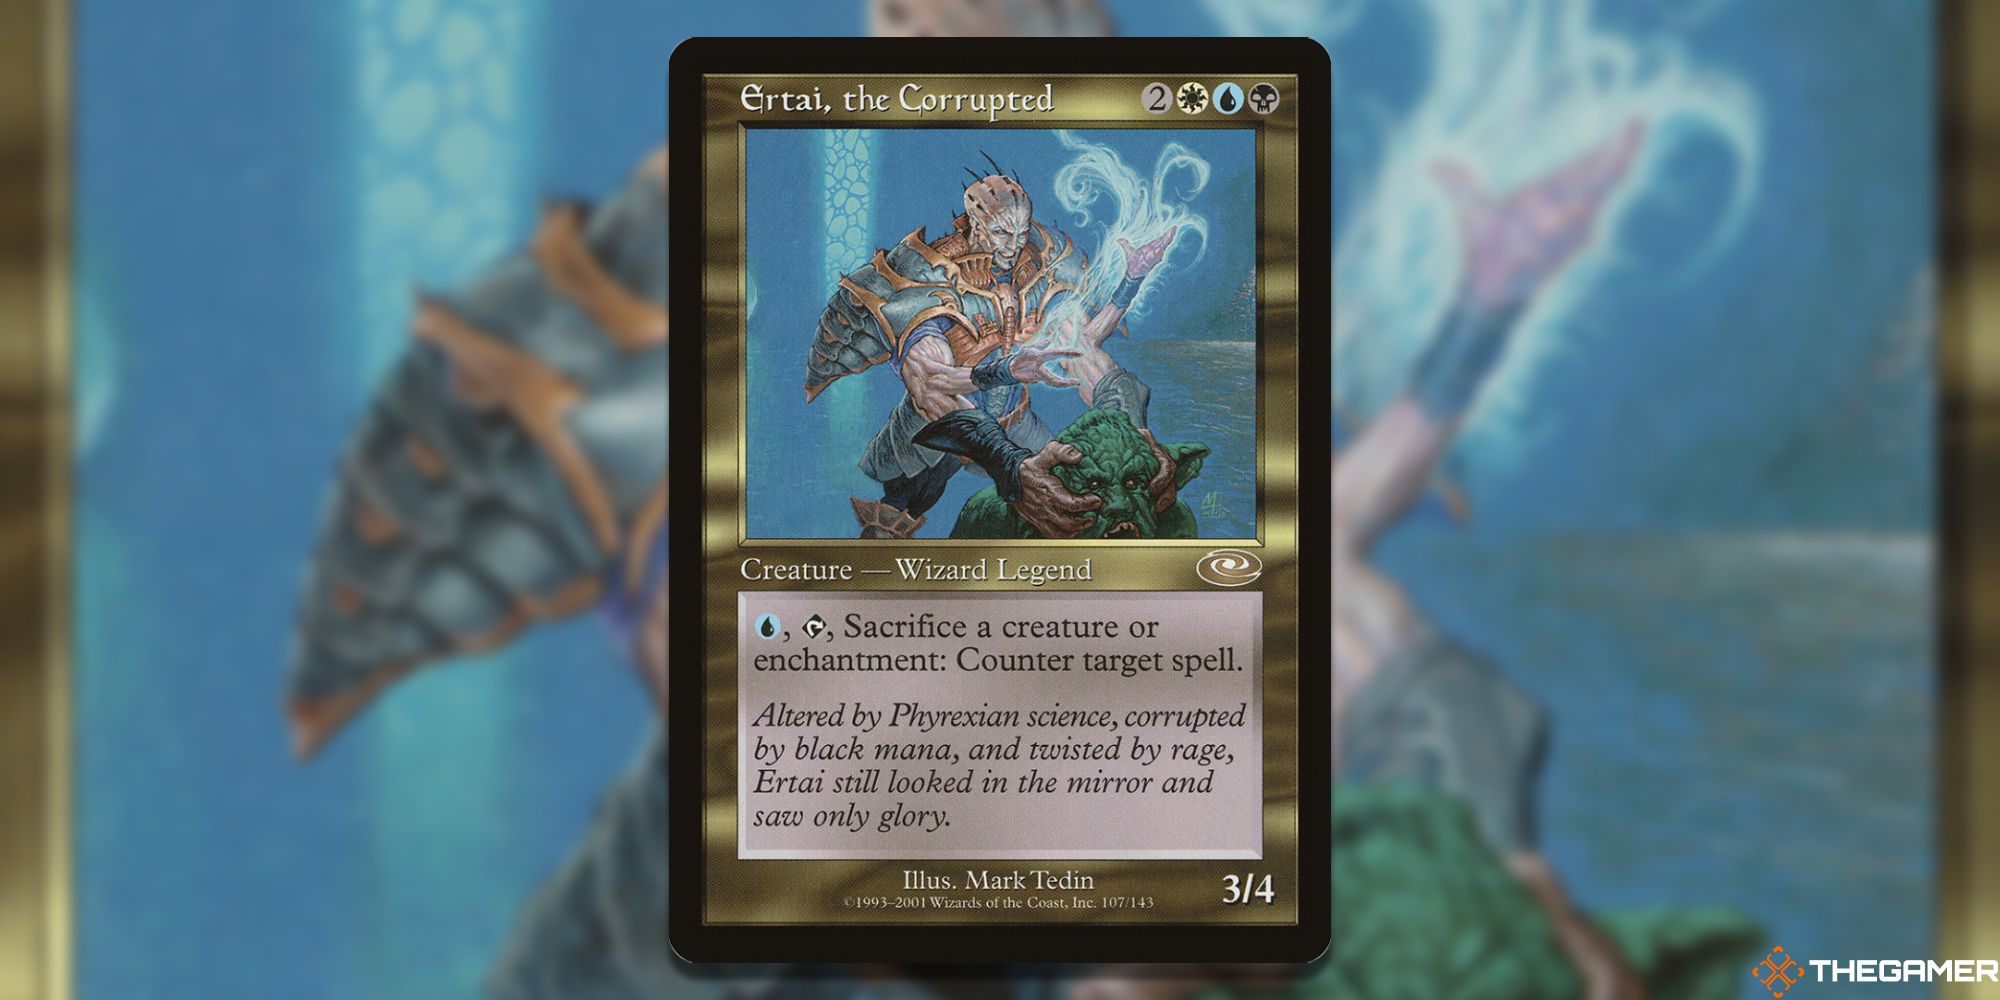 Image of the Ertai, the Corrupted card in Magic: The Gathering, with art by Mark Tedin